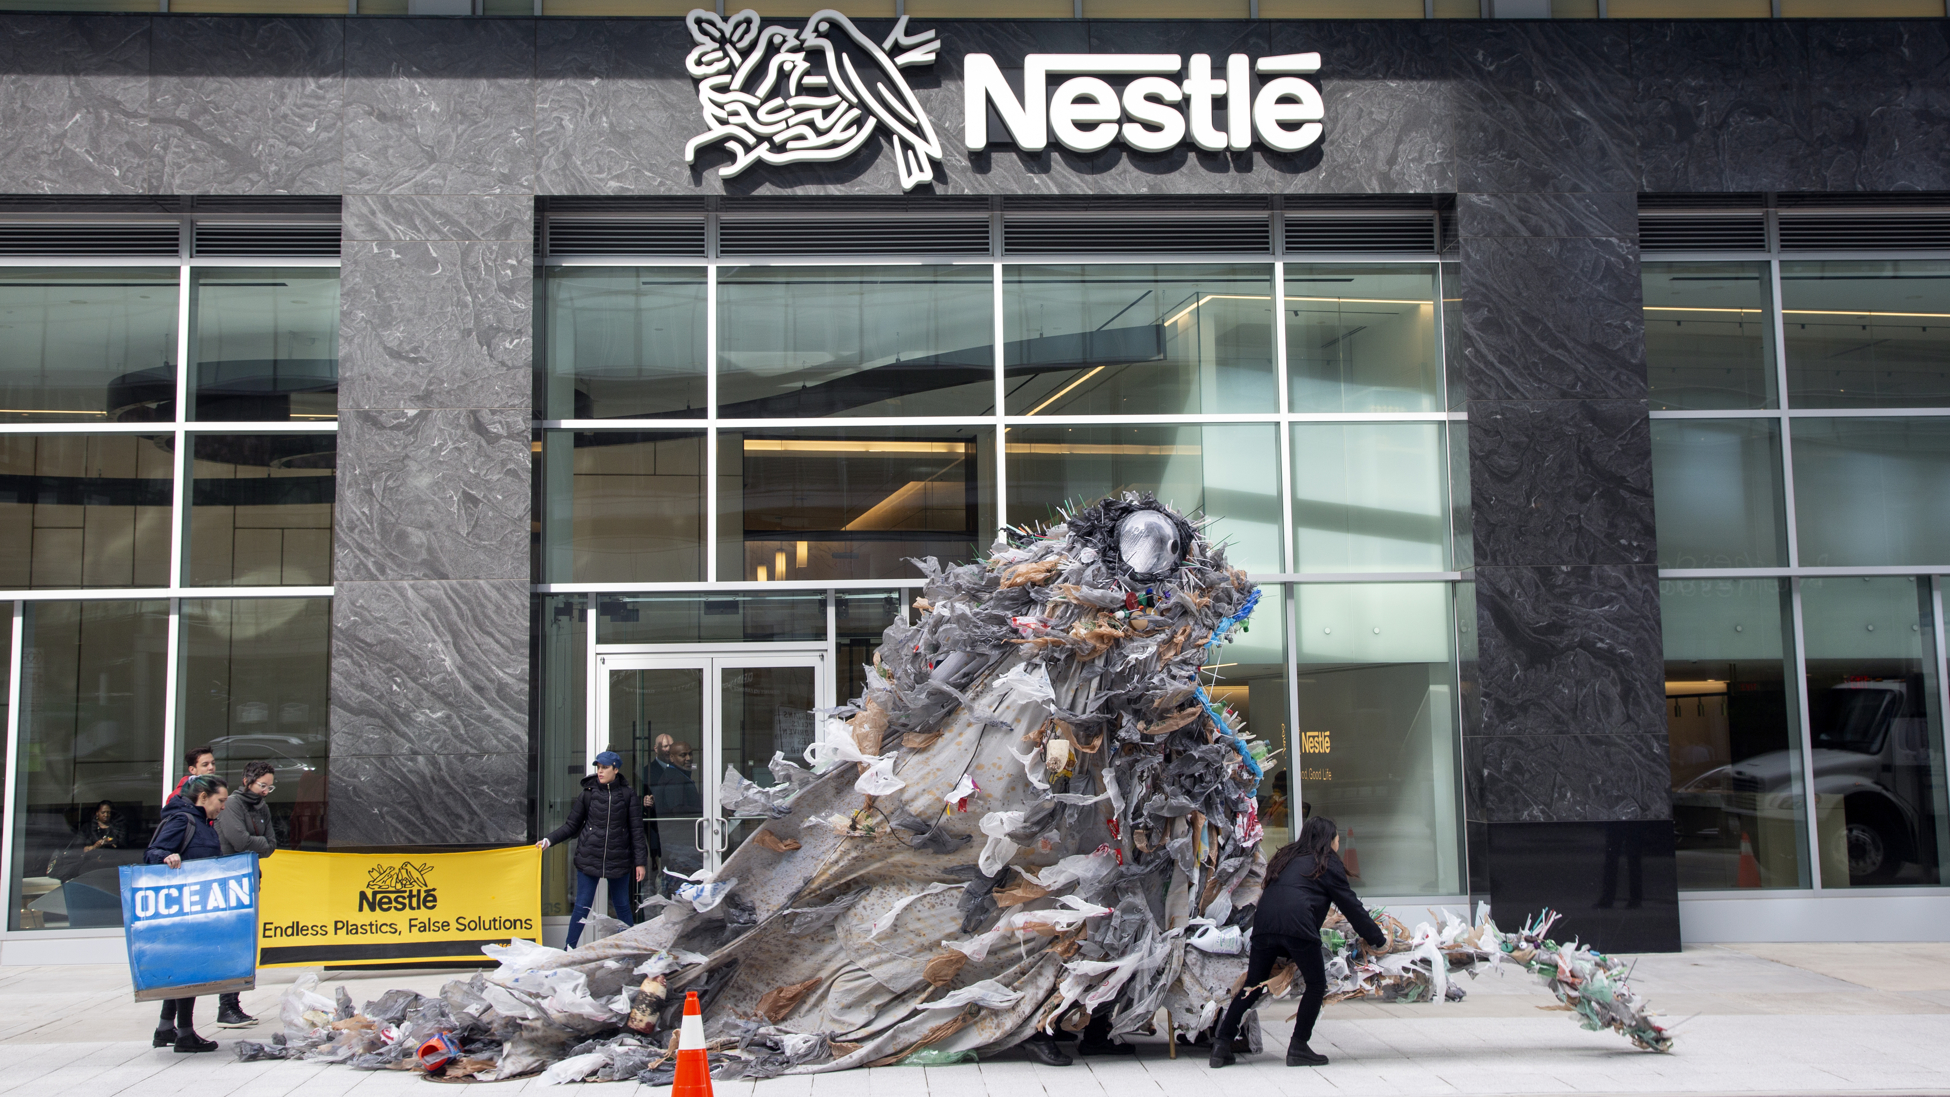 Activists deliver giant trash monsters to Nestlé headquarters to protest plastic pollution